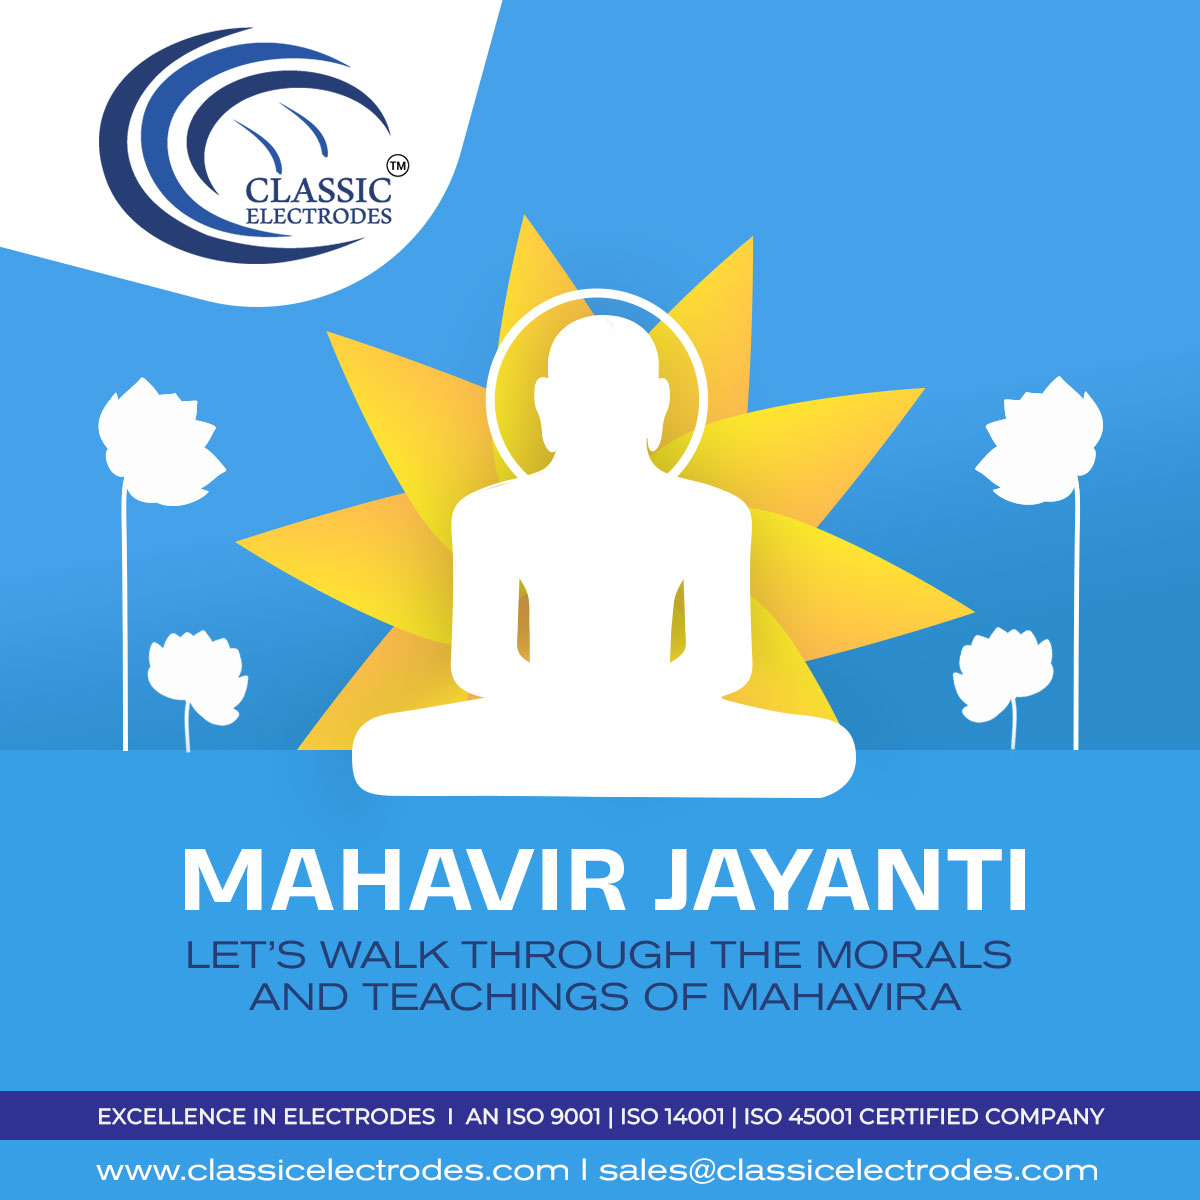 Warm wishes to all on this auspicious occasion. This Mahavir Jayanti, may we all receive inner liberation.

#MahavirJayanti #MahavirJayanti2024 #Classicelectrodes #Steelstructures #steelfabrication